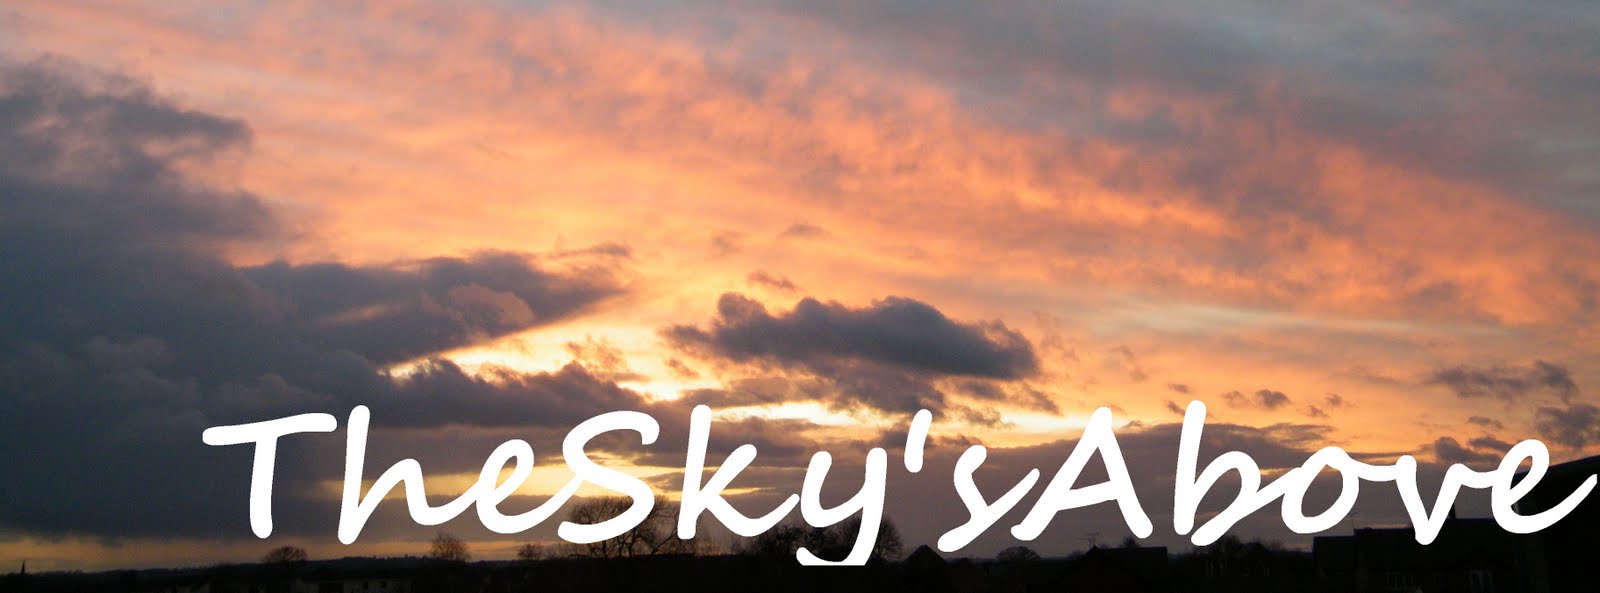 TheSkysAbove